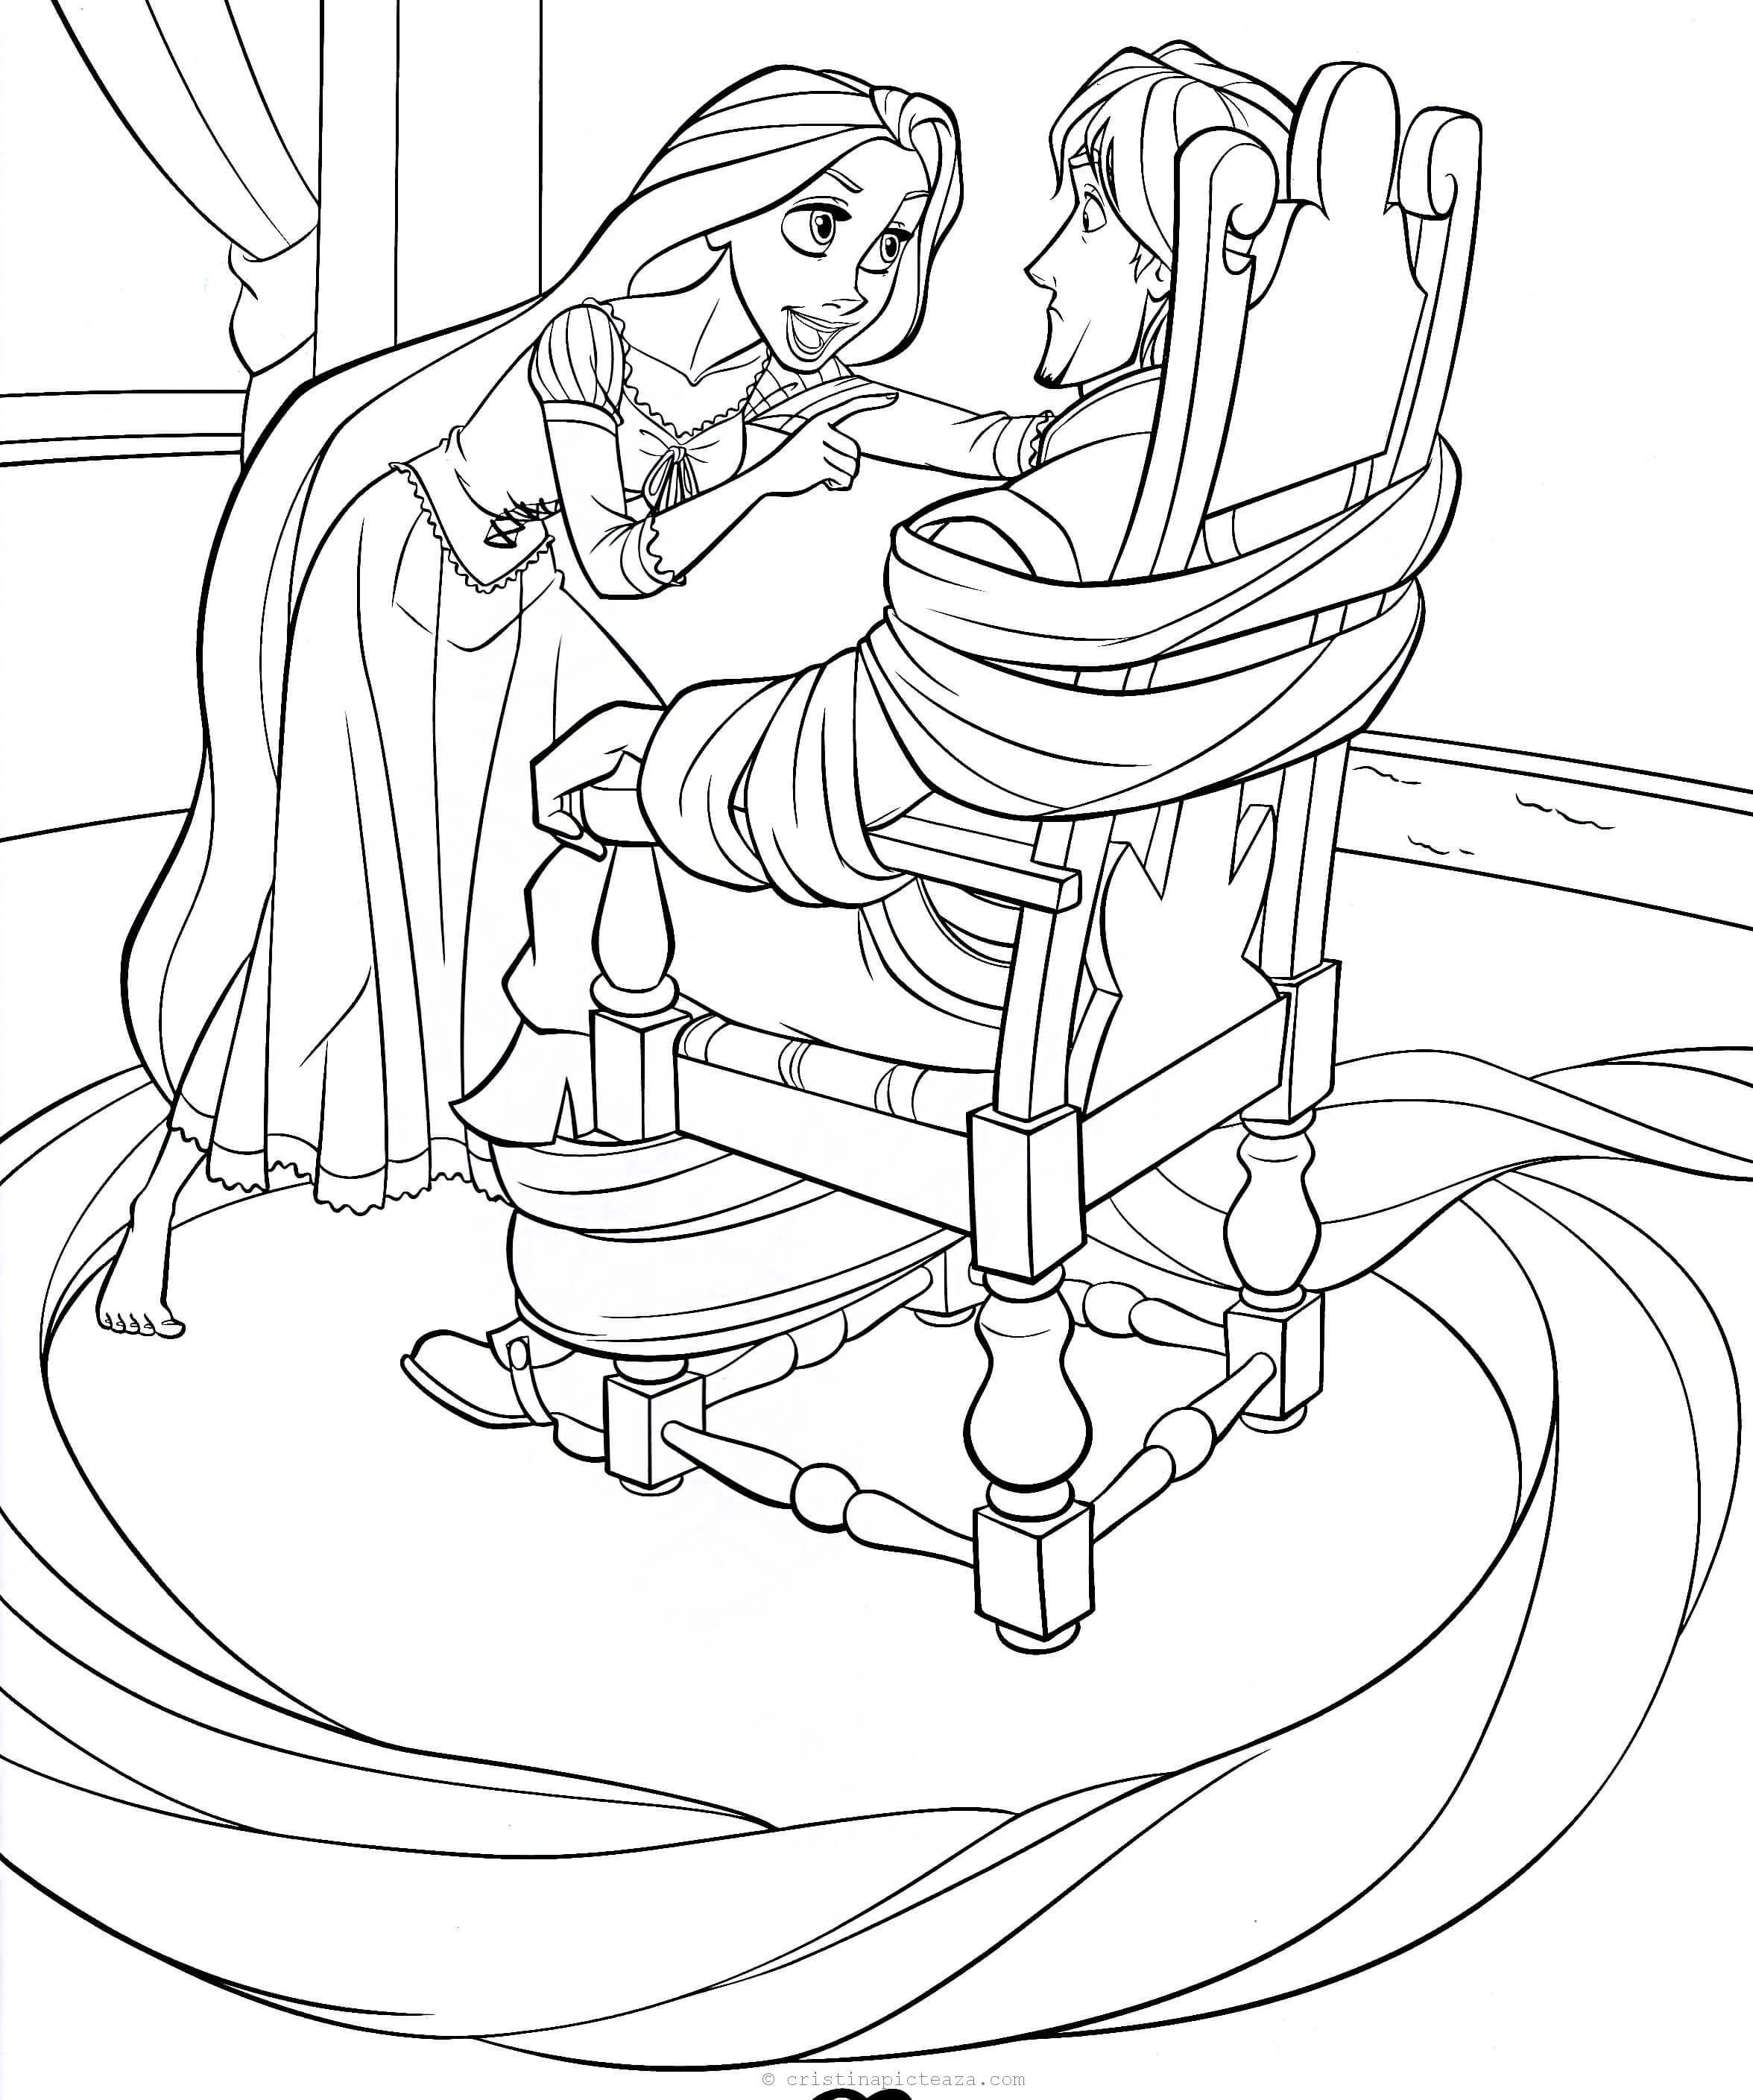 Tangled coloring pages â rapunzel coloring sheets